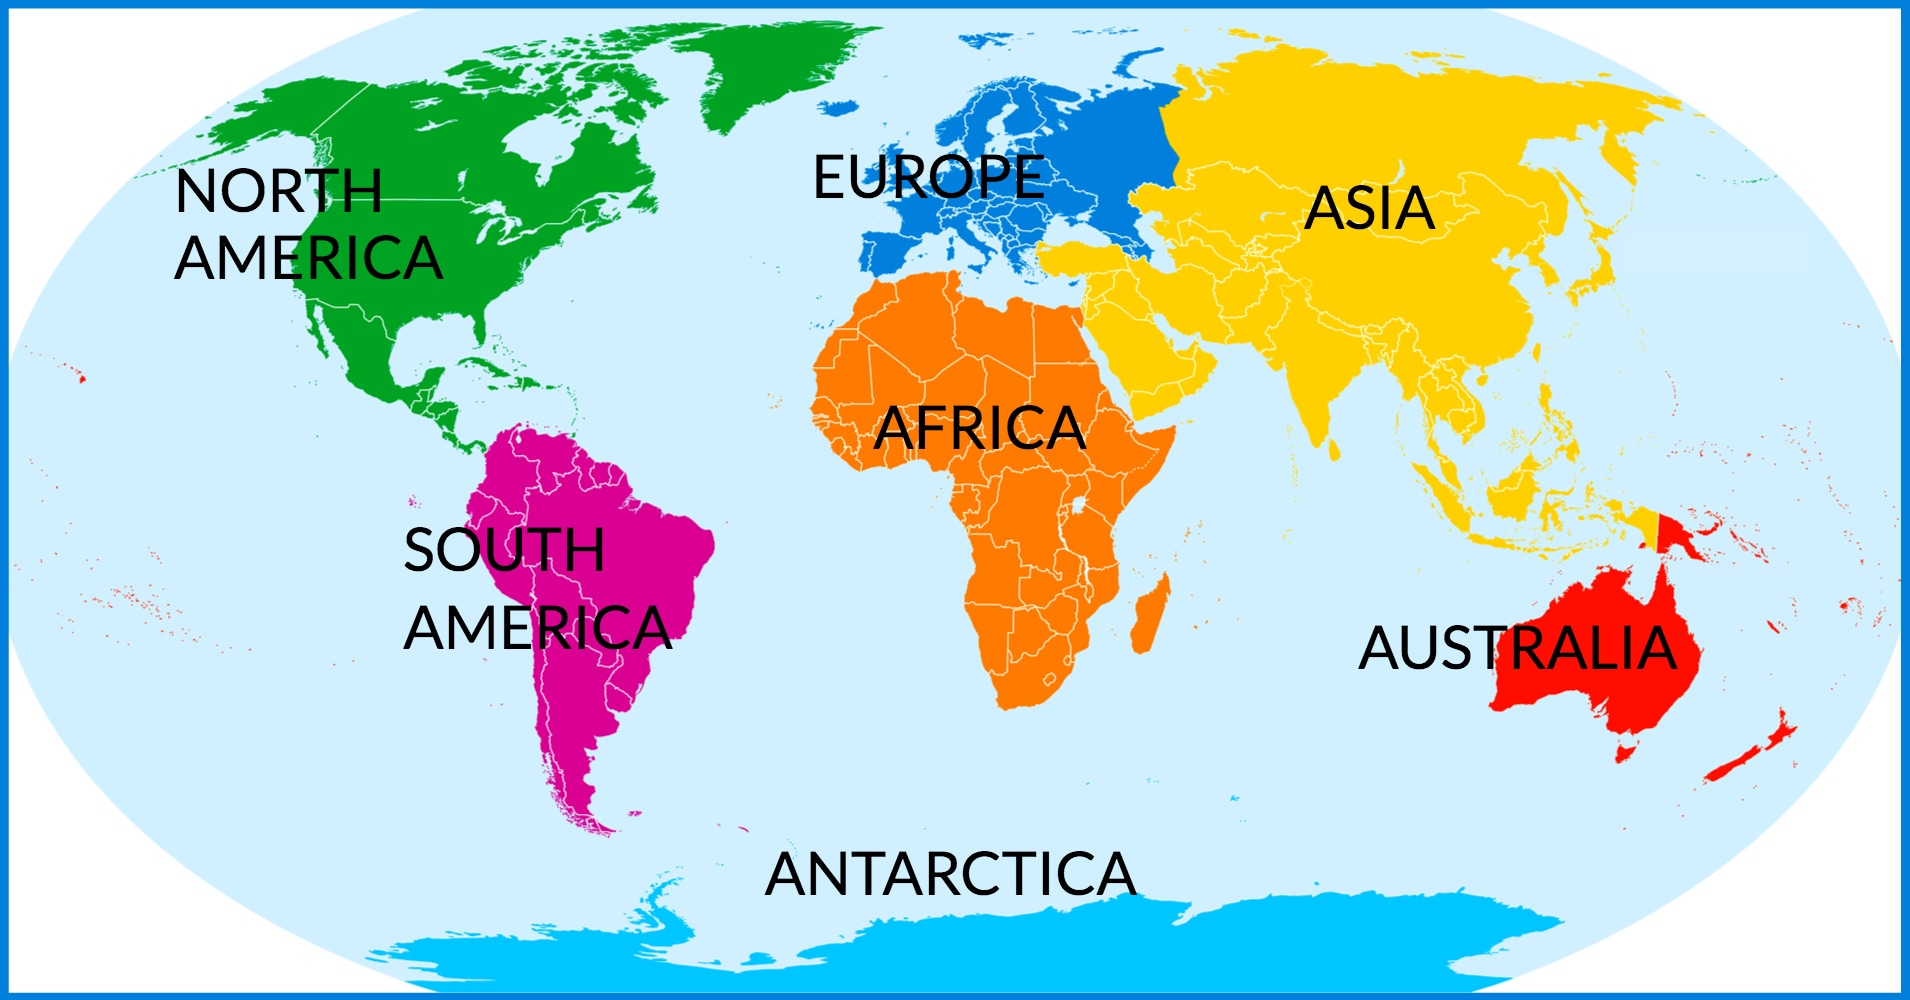 Seven Continents Question 1 - Which is the biggest continent: